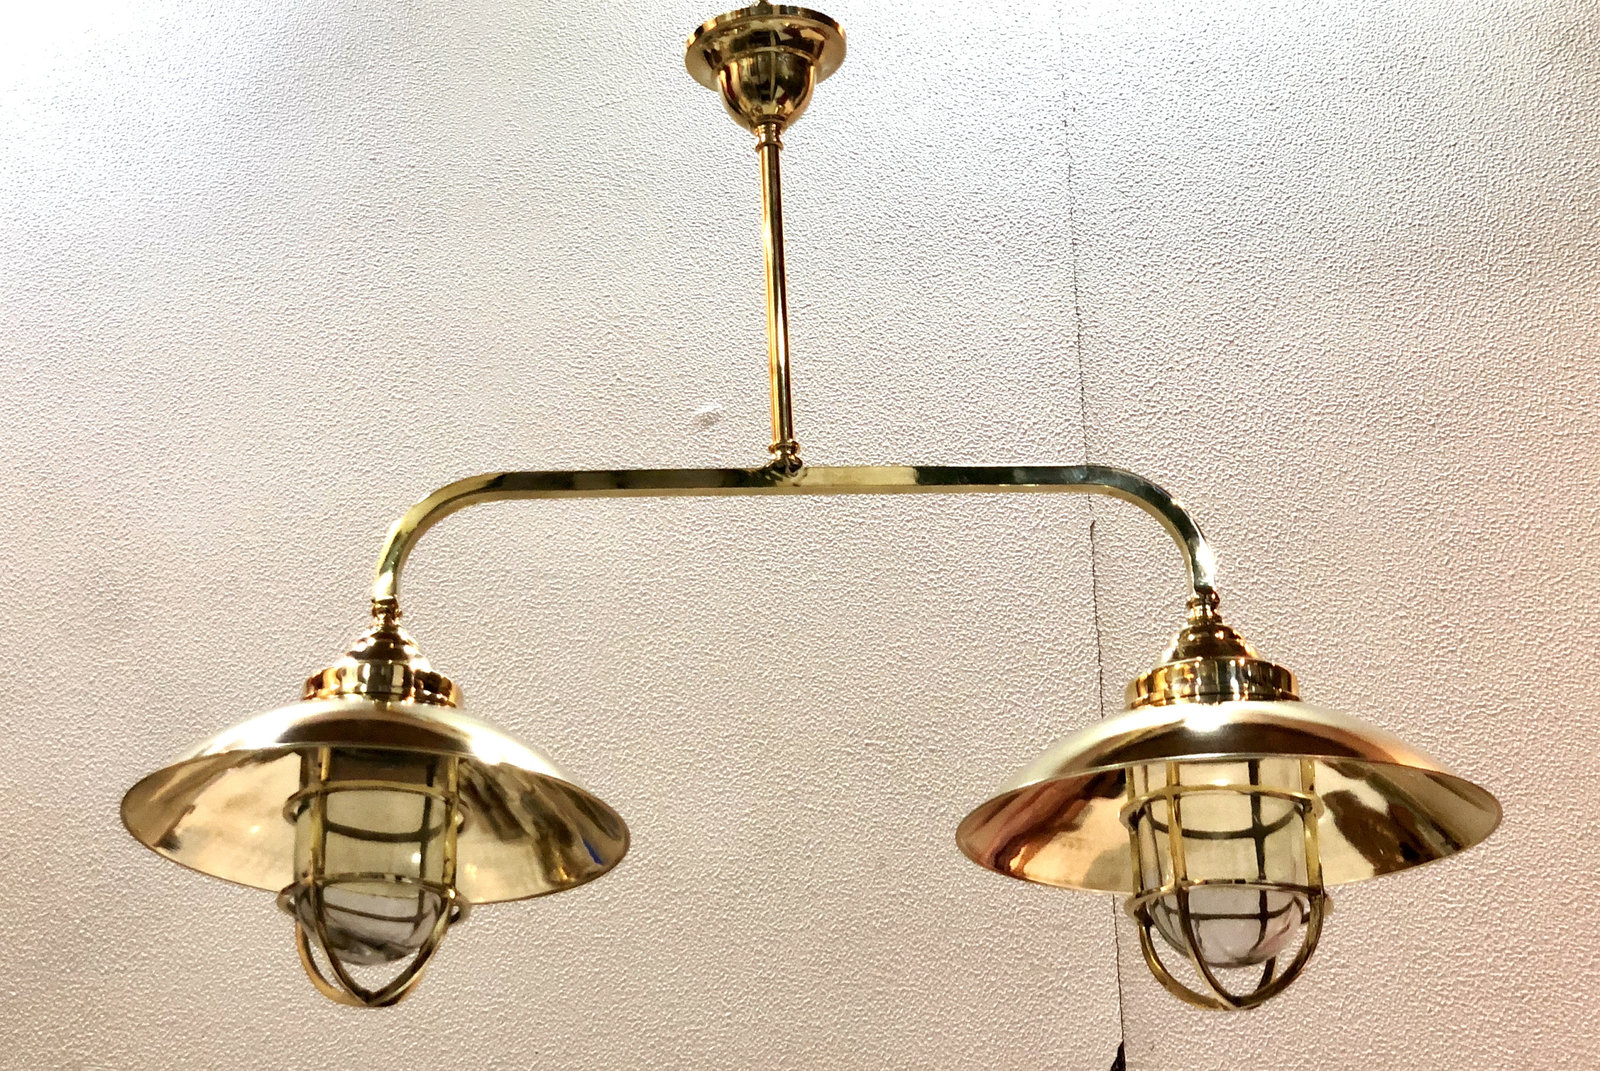 Nautical Retro Ship New Solid Brass Hanging Cargo Twin Pendant Light with Shade